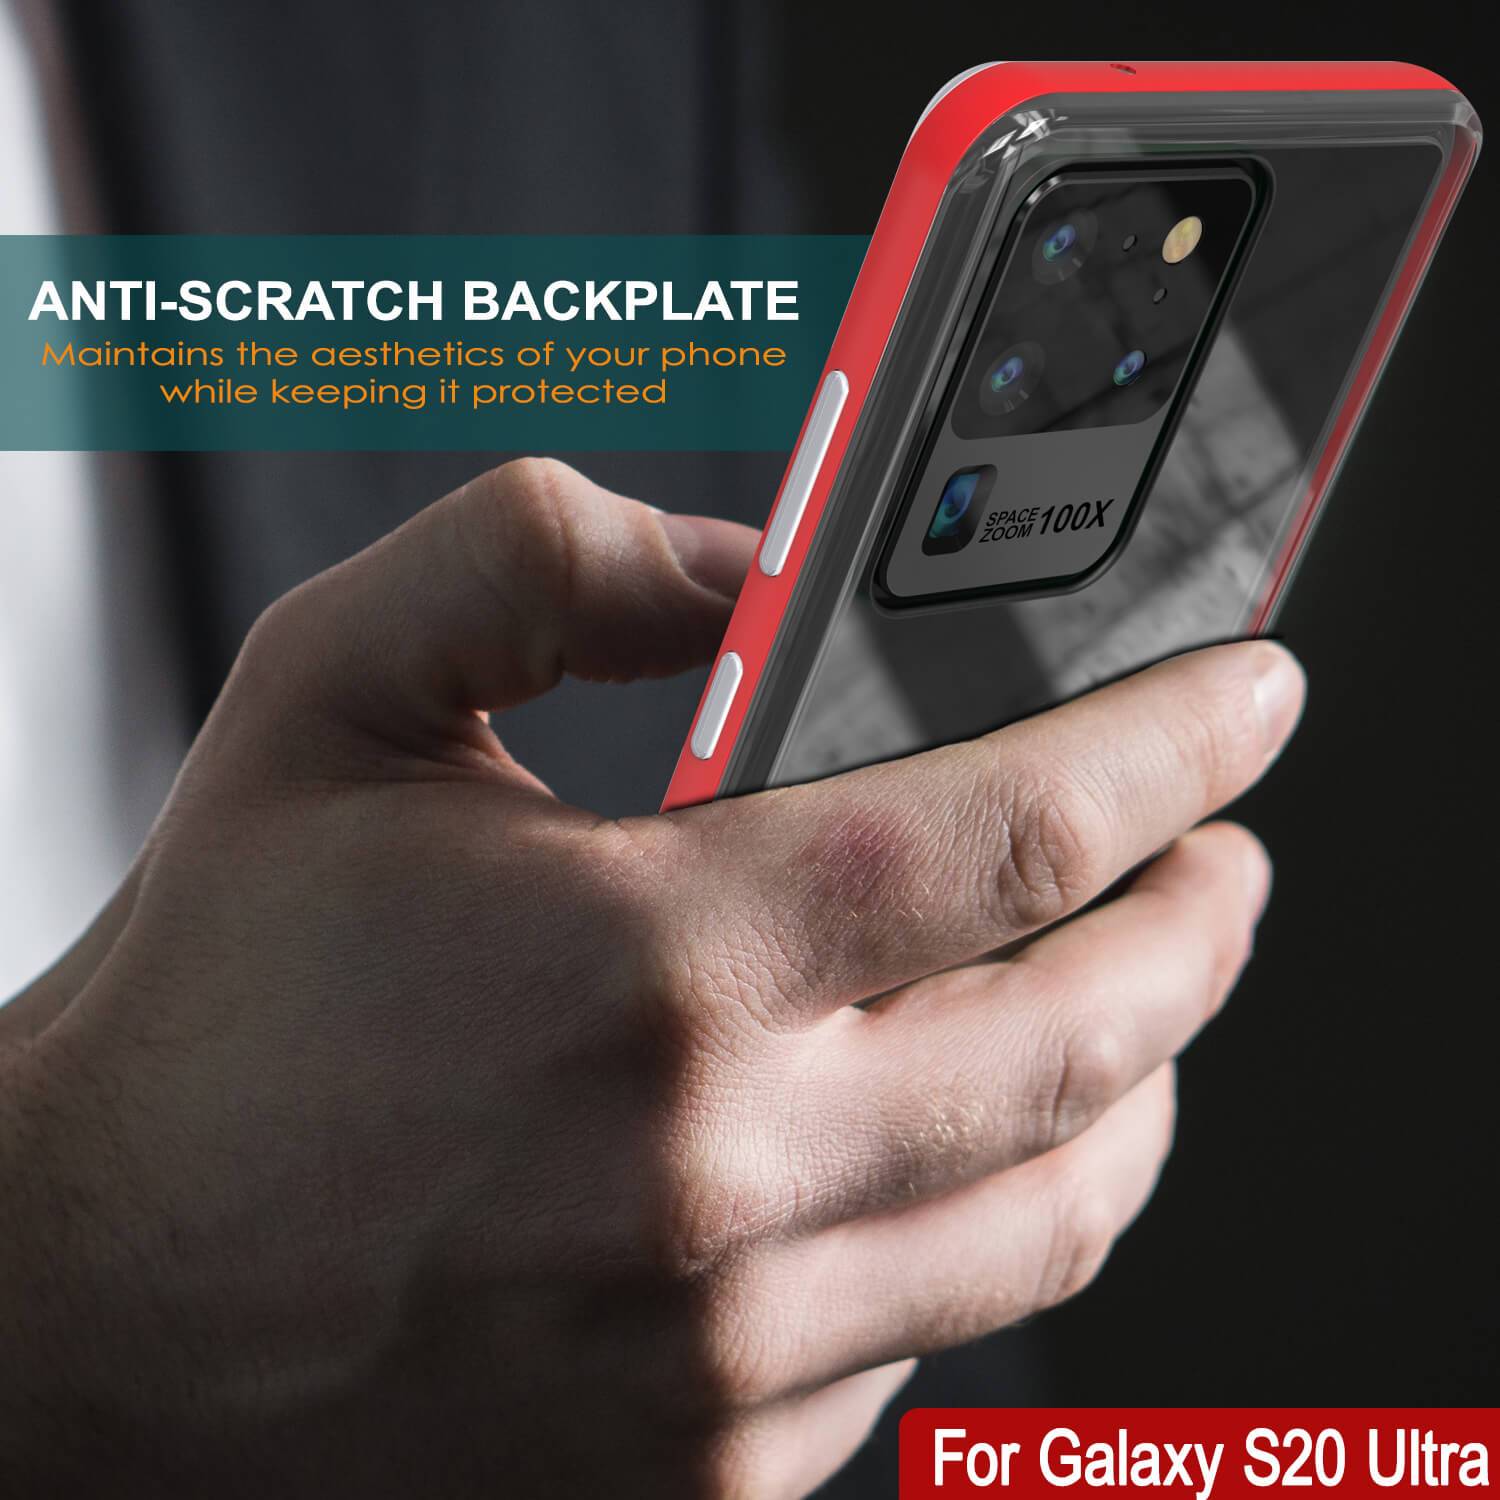 Galaxy S20 Ultra Case, PUNKcase [LUCID 3.0 Series] [Slim Fit] Armor Cover w/ Integrated Screen Protector [Red]